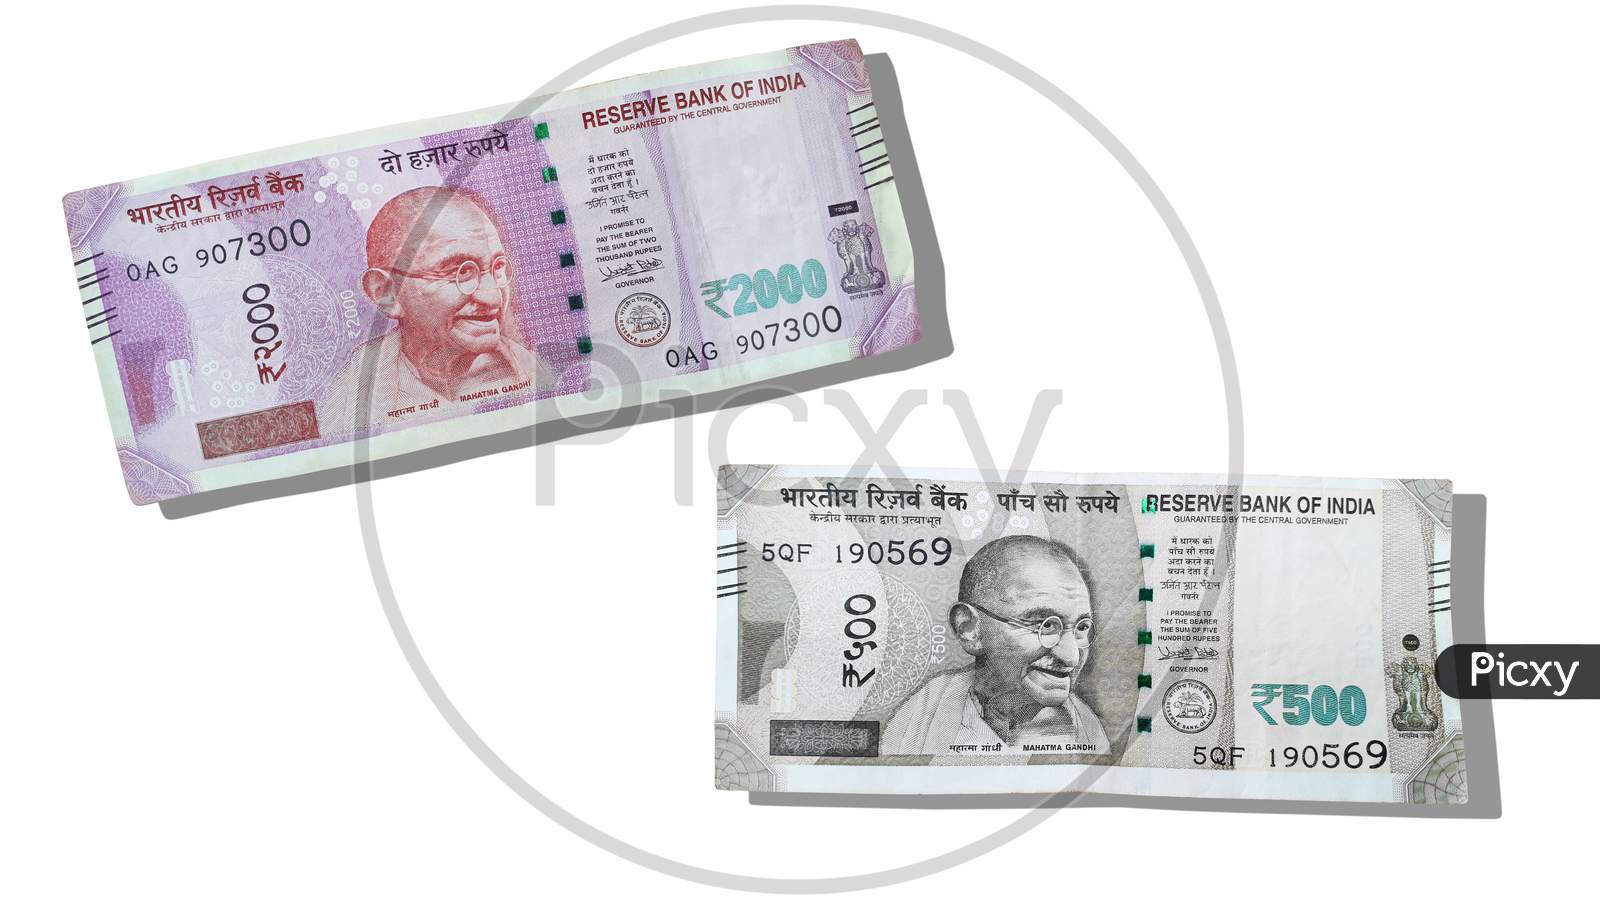 Indian currency note of 2000 and 500 rupees, with the photo printed of Mahatma Gandhi on it -isolated image. The Reserve Bank of India Indian (RBI) launches the currency notes.